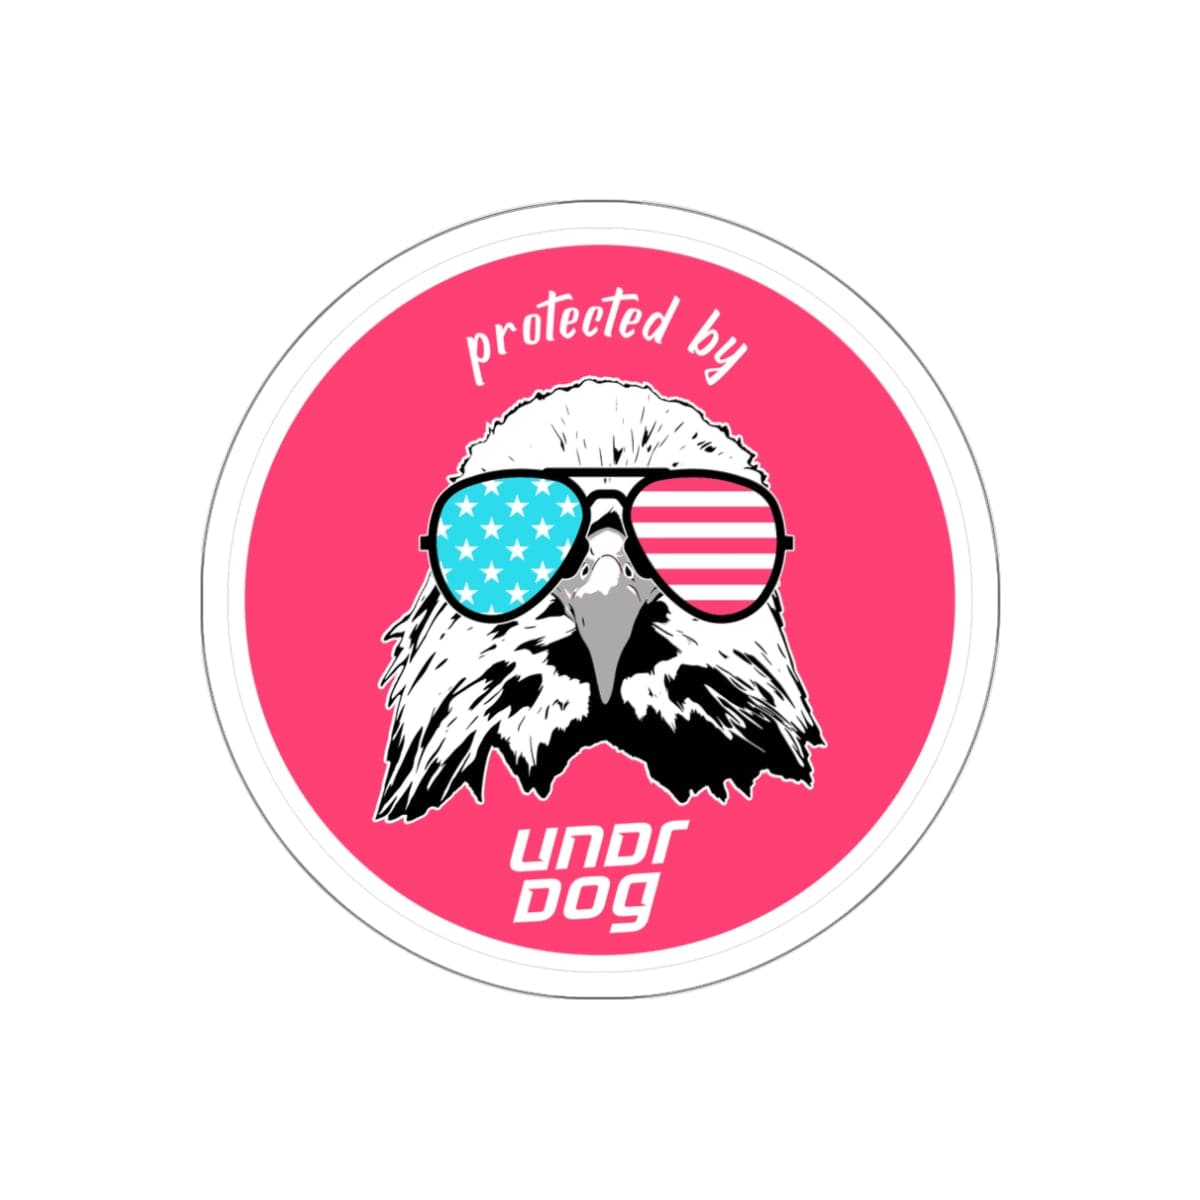 7192456511710976779_1200.jpg - Protected by Undrdog Round Die-Cut Sticker - Undrdog Surface Products